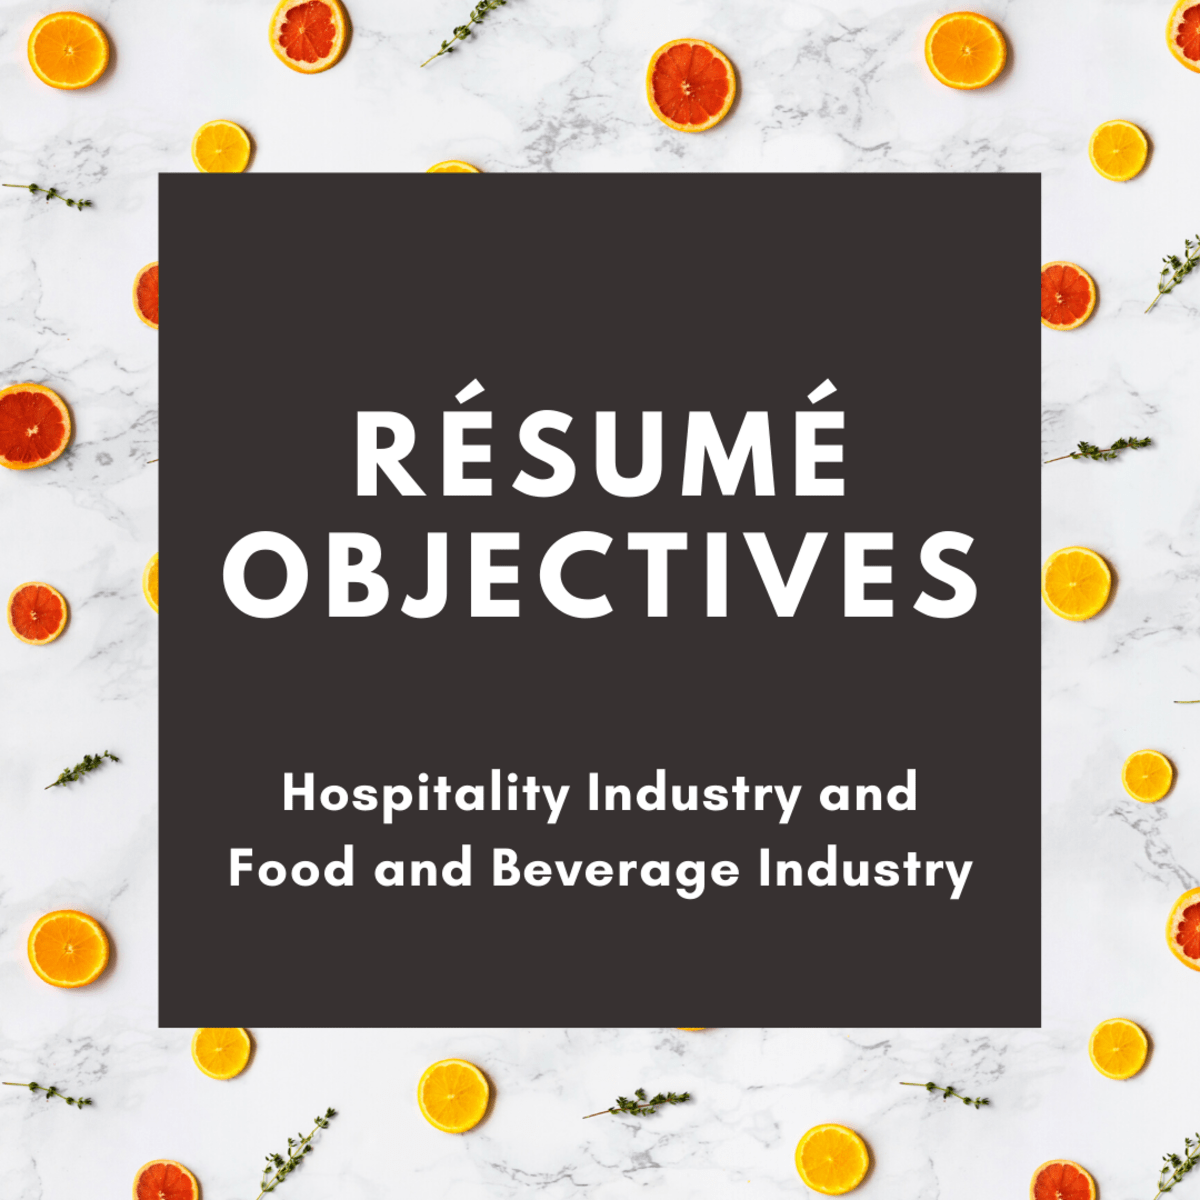 Sample Objectives For A Resume For The Hospitality Industry Toughnickel